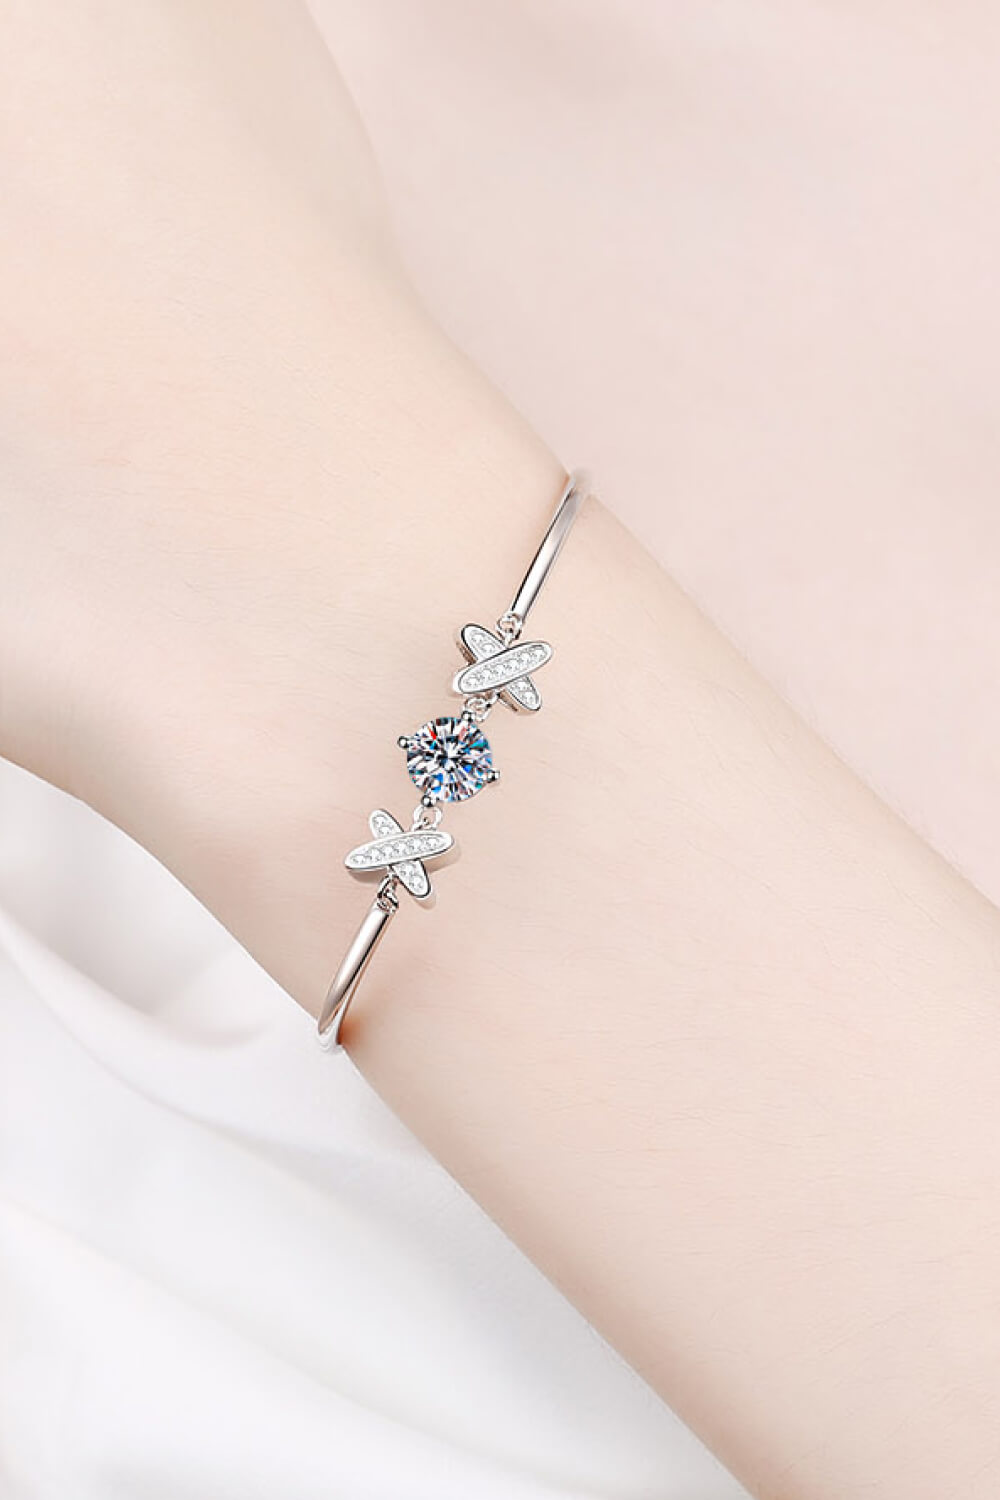 1 Carat 9" Moissanite Sterling Silver Bracelet with Zircon Accent Stones - Ti Amo I love you